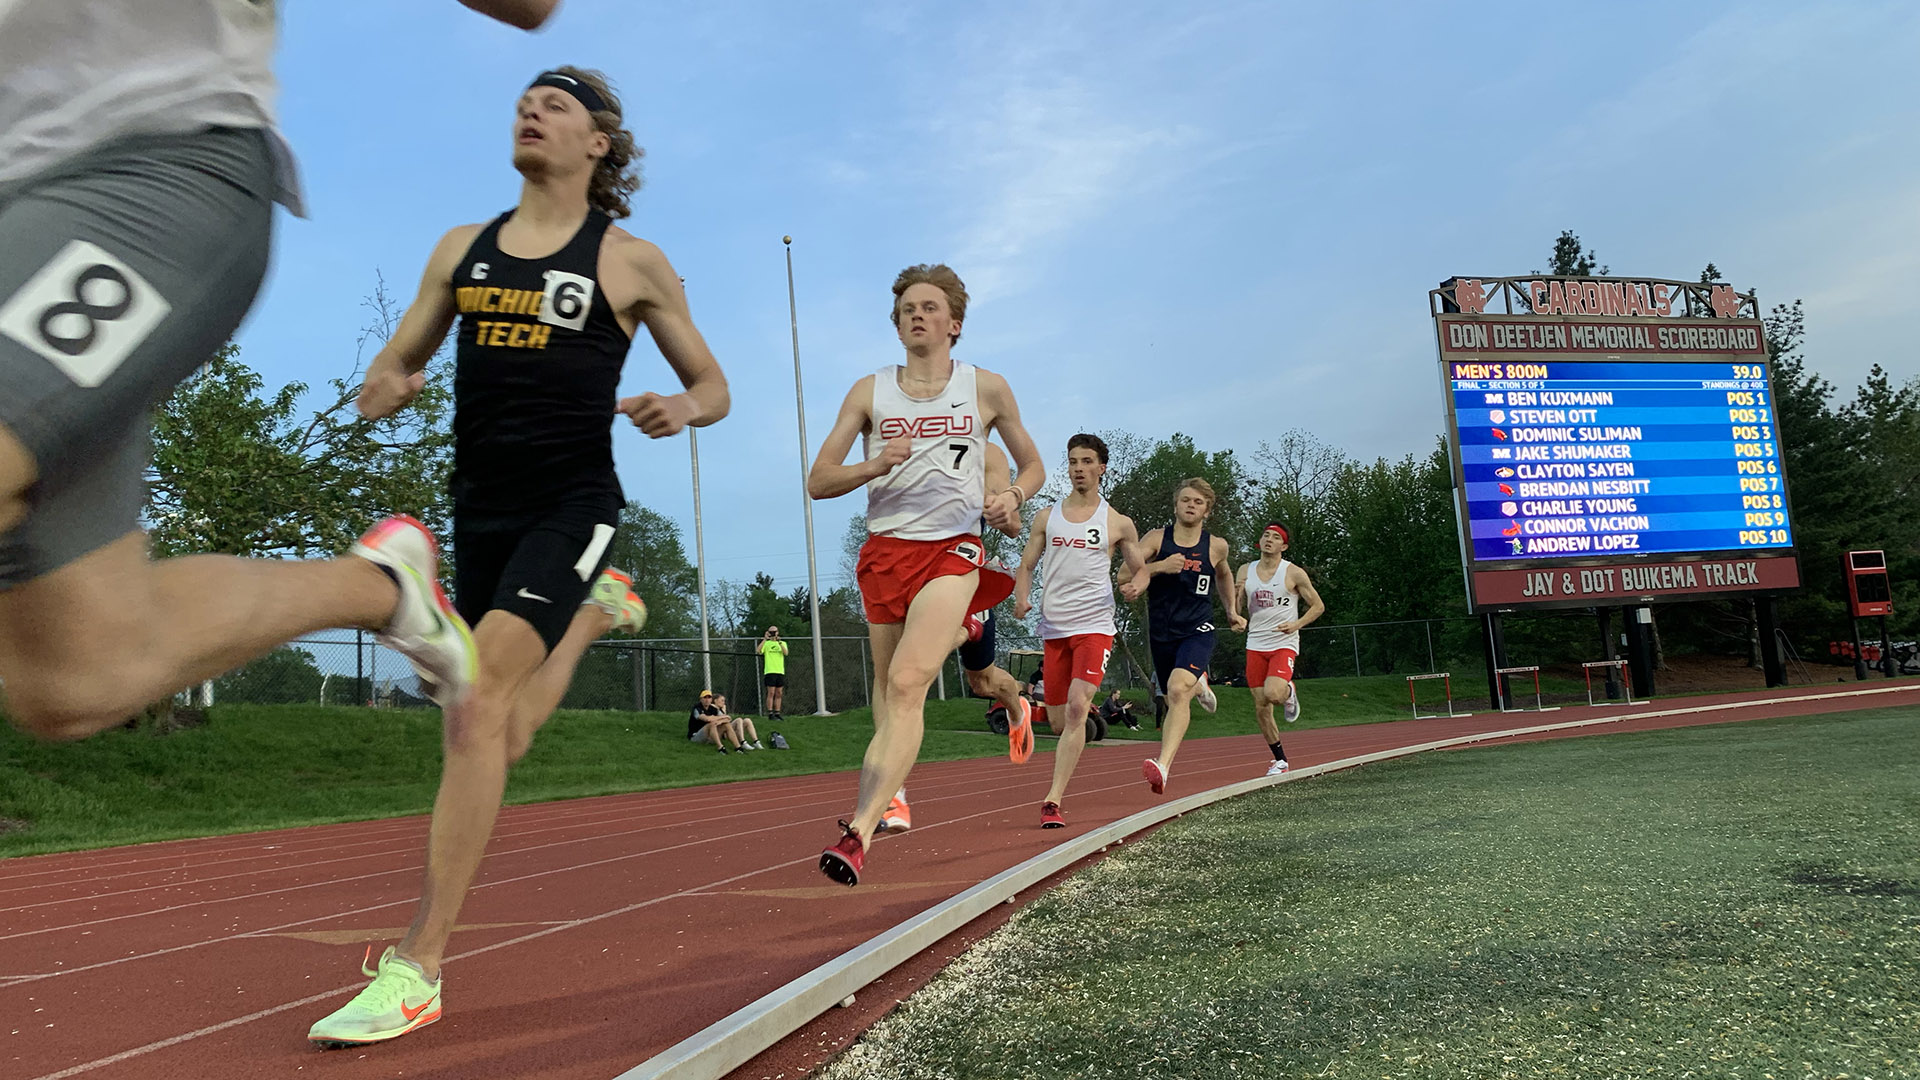 Another school record falls to Sayen at Carius Gregory Invitational